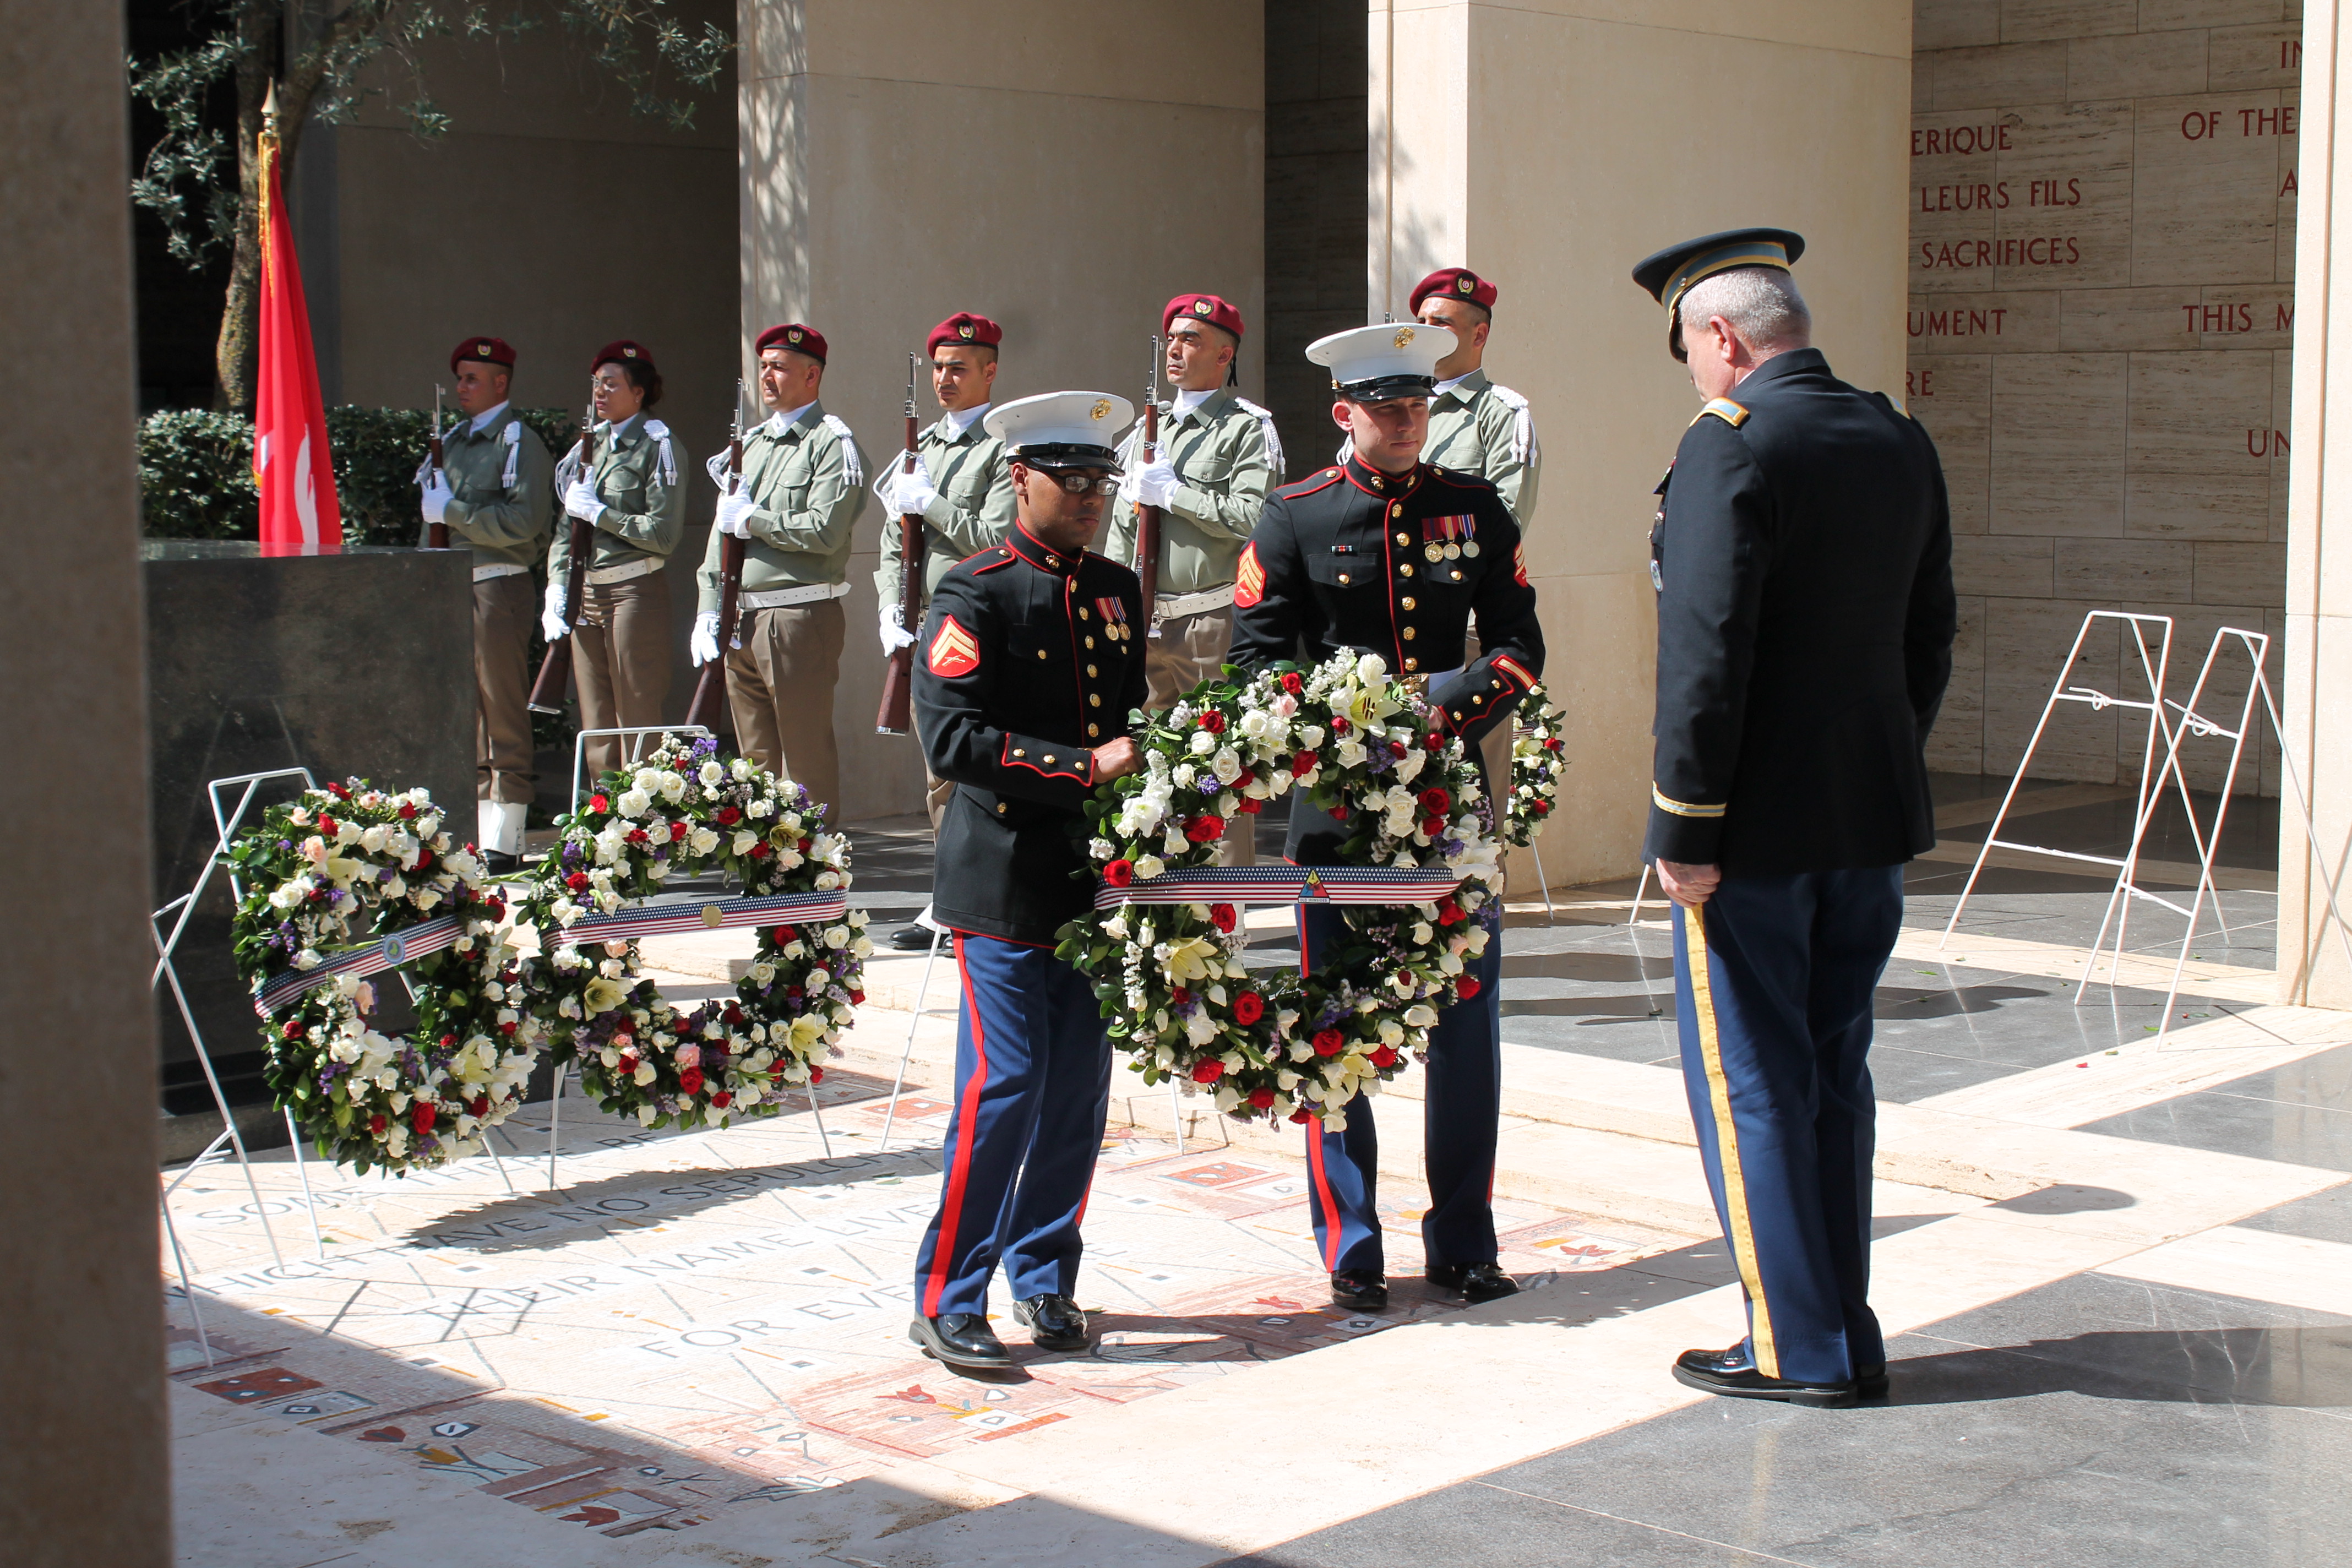 Two Marines present a floral wreath to a man in uniform. 